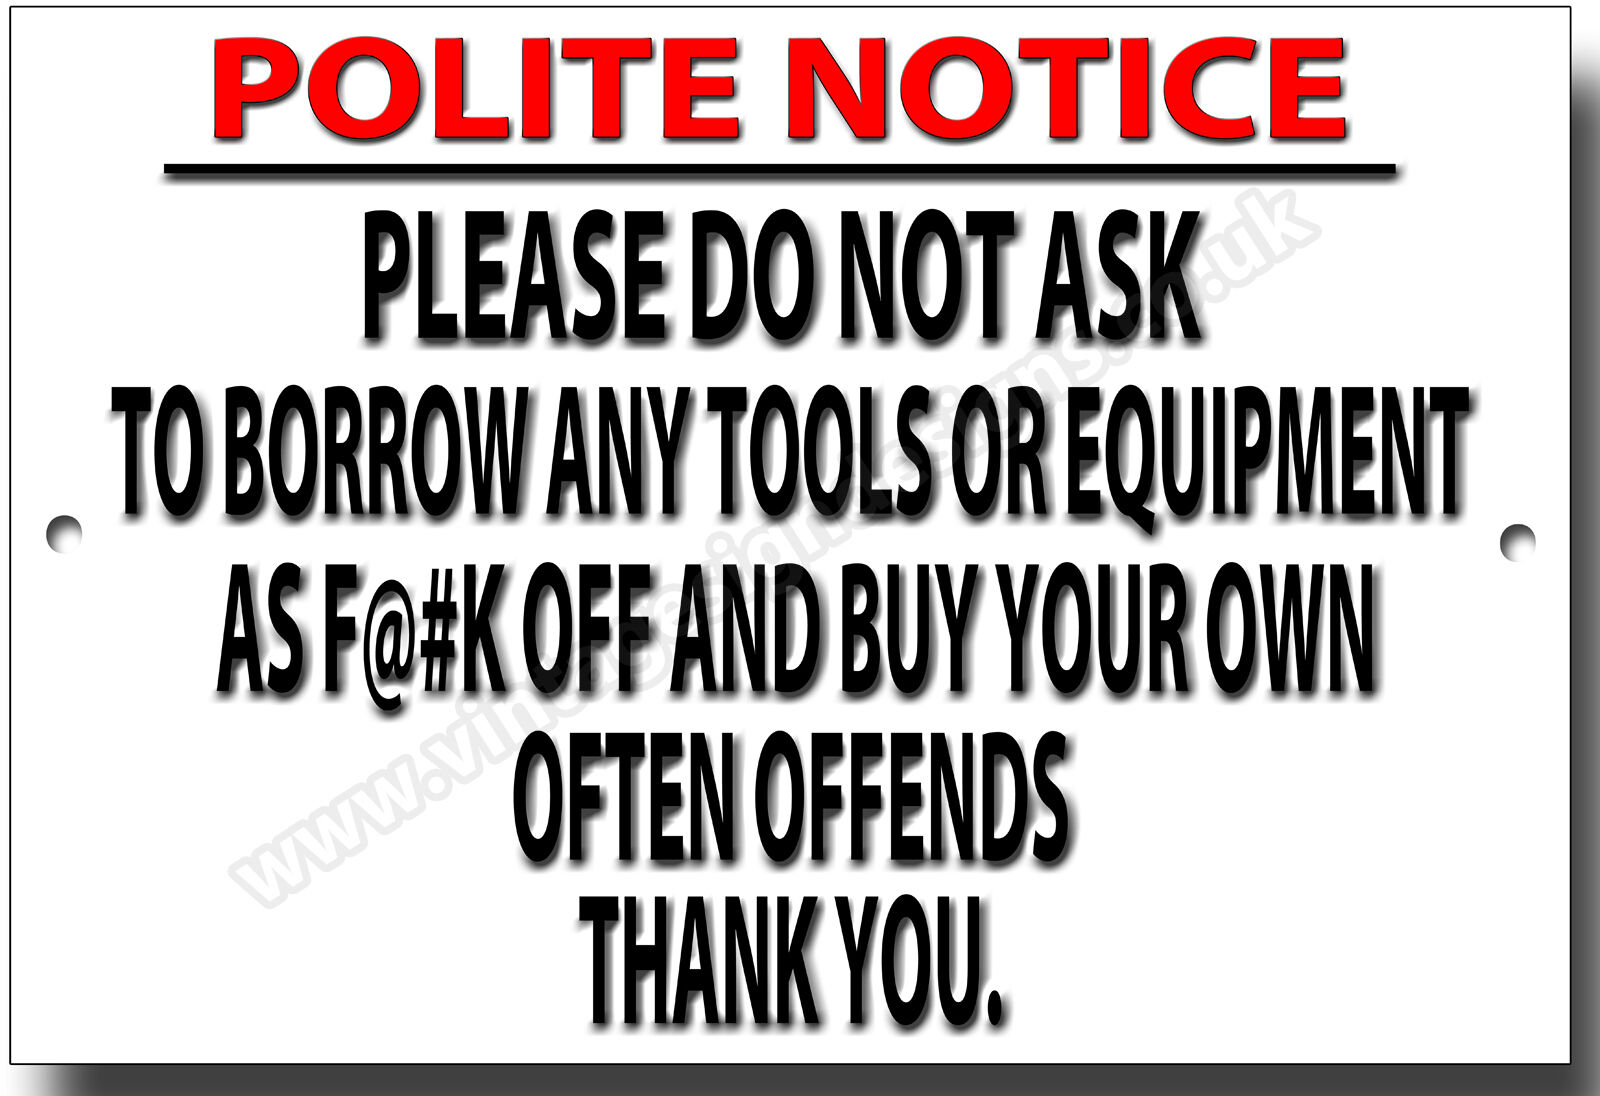 POLITE NOTICE PLEASE DO NOT ASK TO BORROW ANY TOOLS OR EQUIPMENT METAL SIGN.f*@k